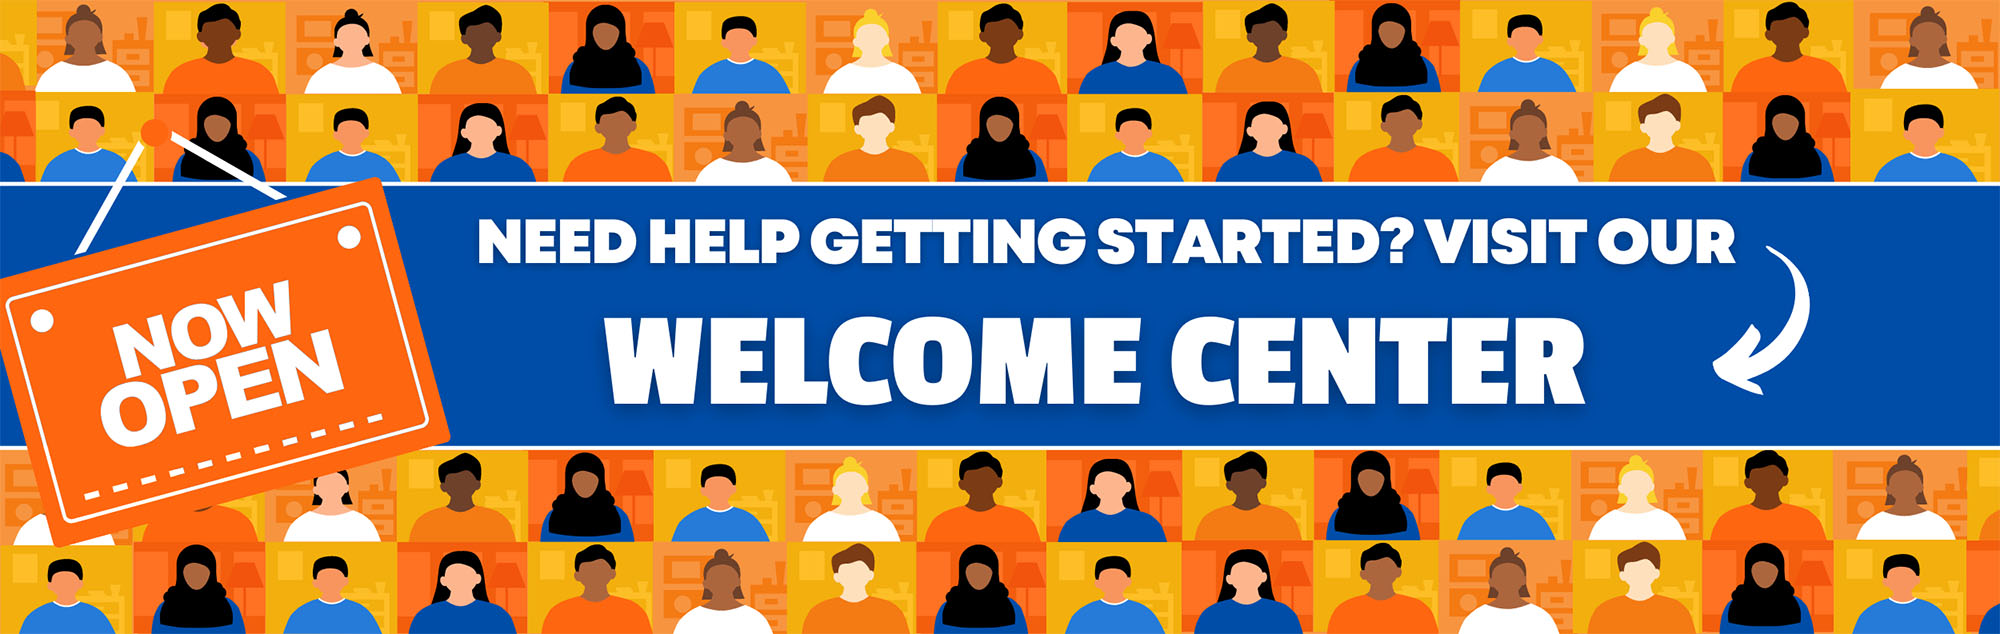  New Students! Get Started at the Welcome Center artwork with type over images of people 